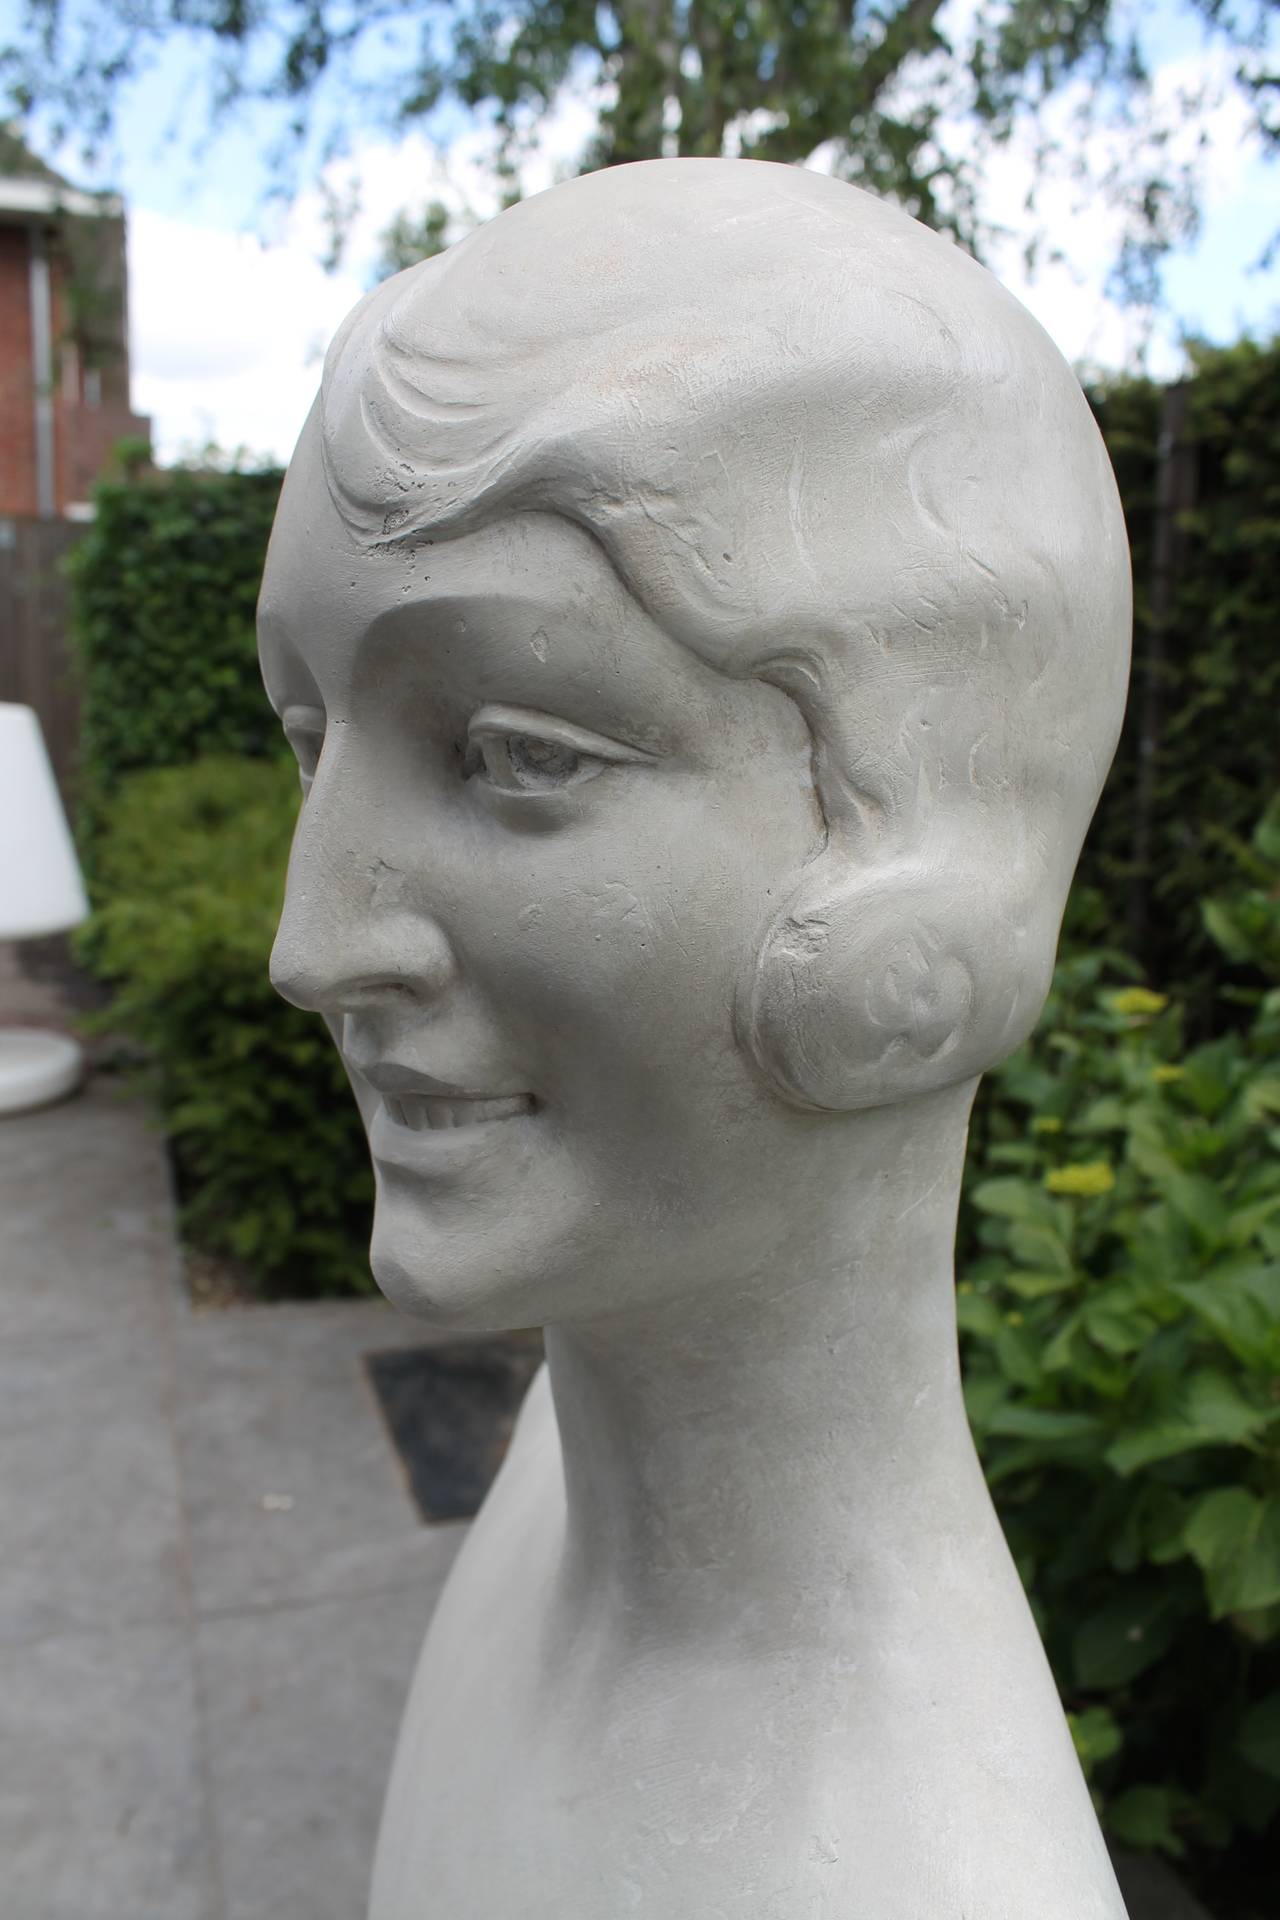 Hand-Crafted Shop Window Bust in Plaster, circa 1920